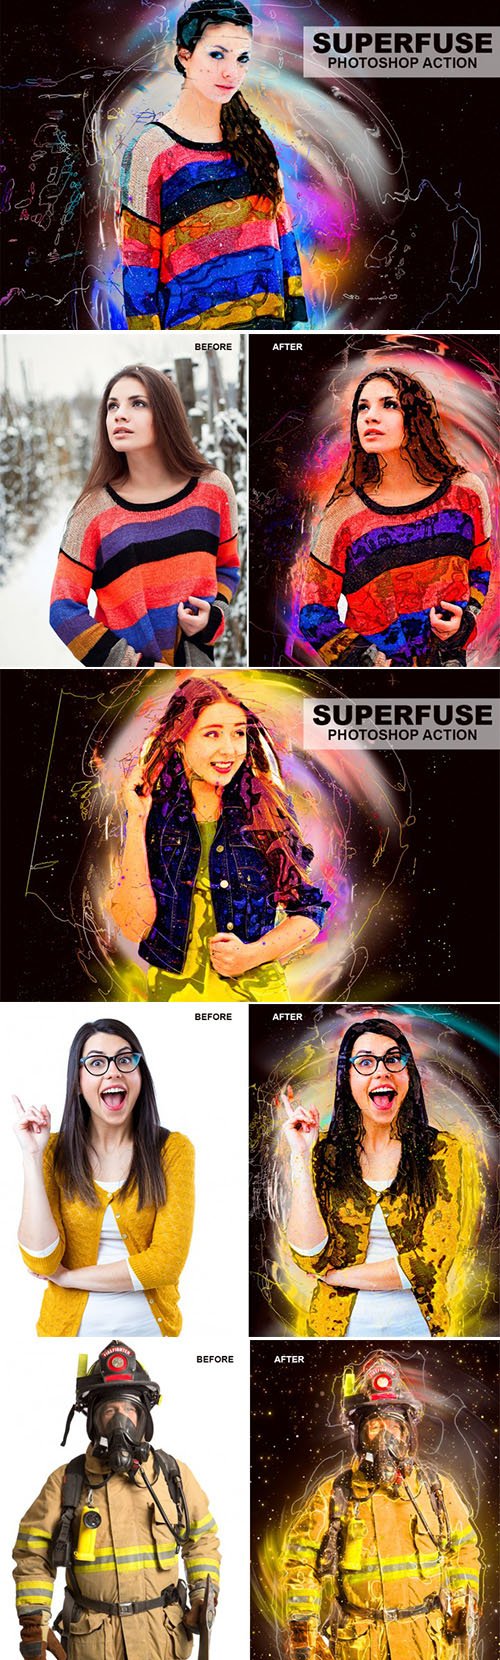 Graphicriver - Superfuse Photoshop Action - 21965650